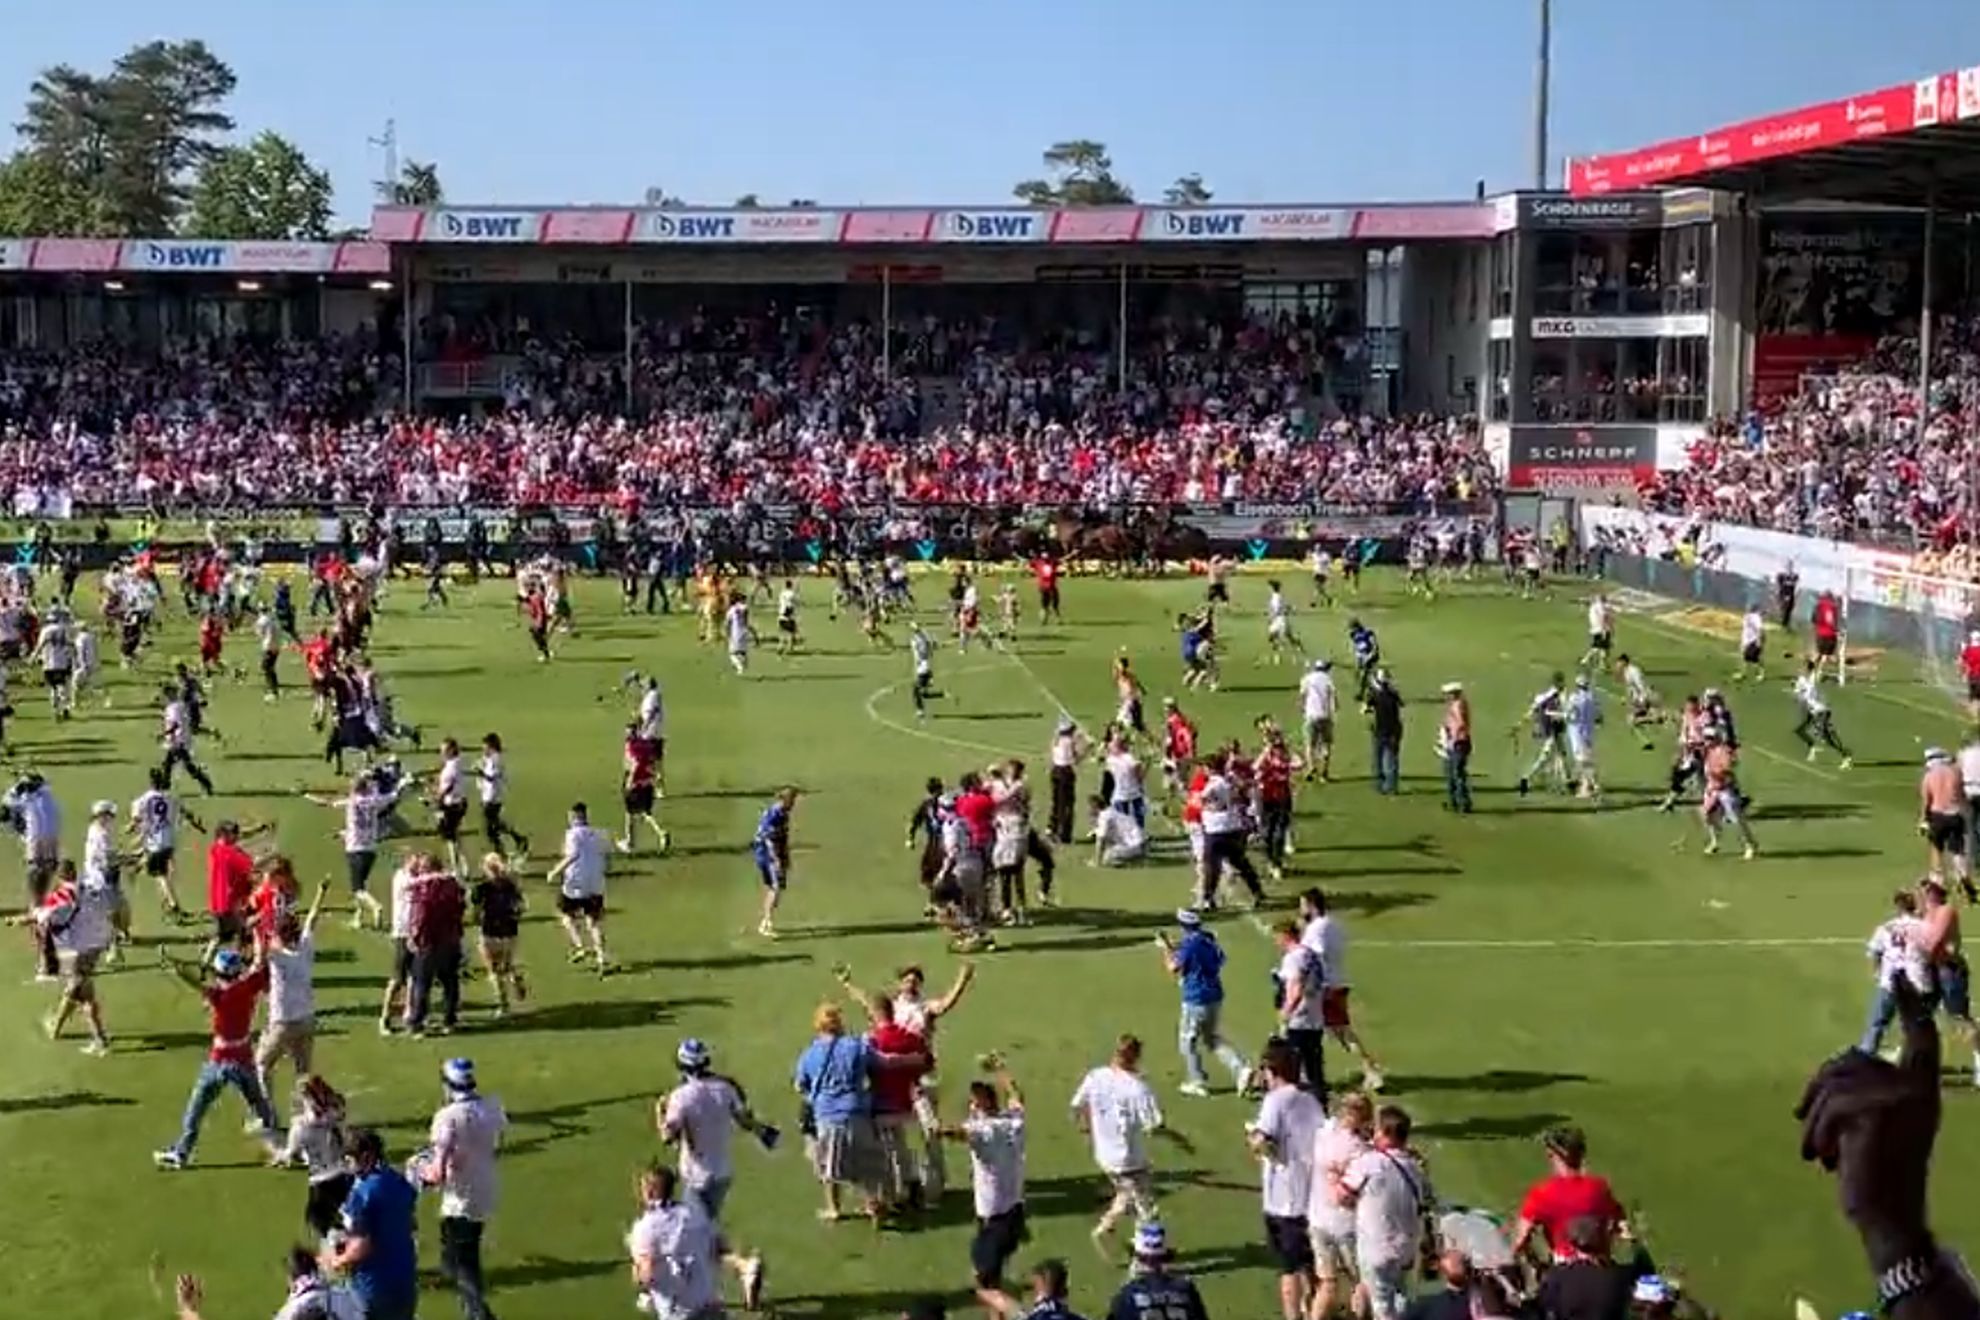 Unbelievable! Hamburg fans invade pitch to celebrate promotion... but they didn't actually go up!